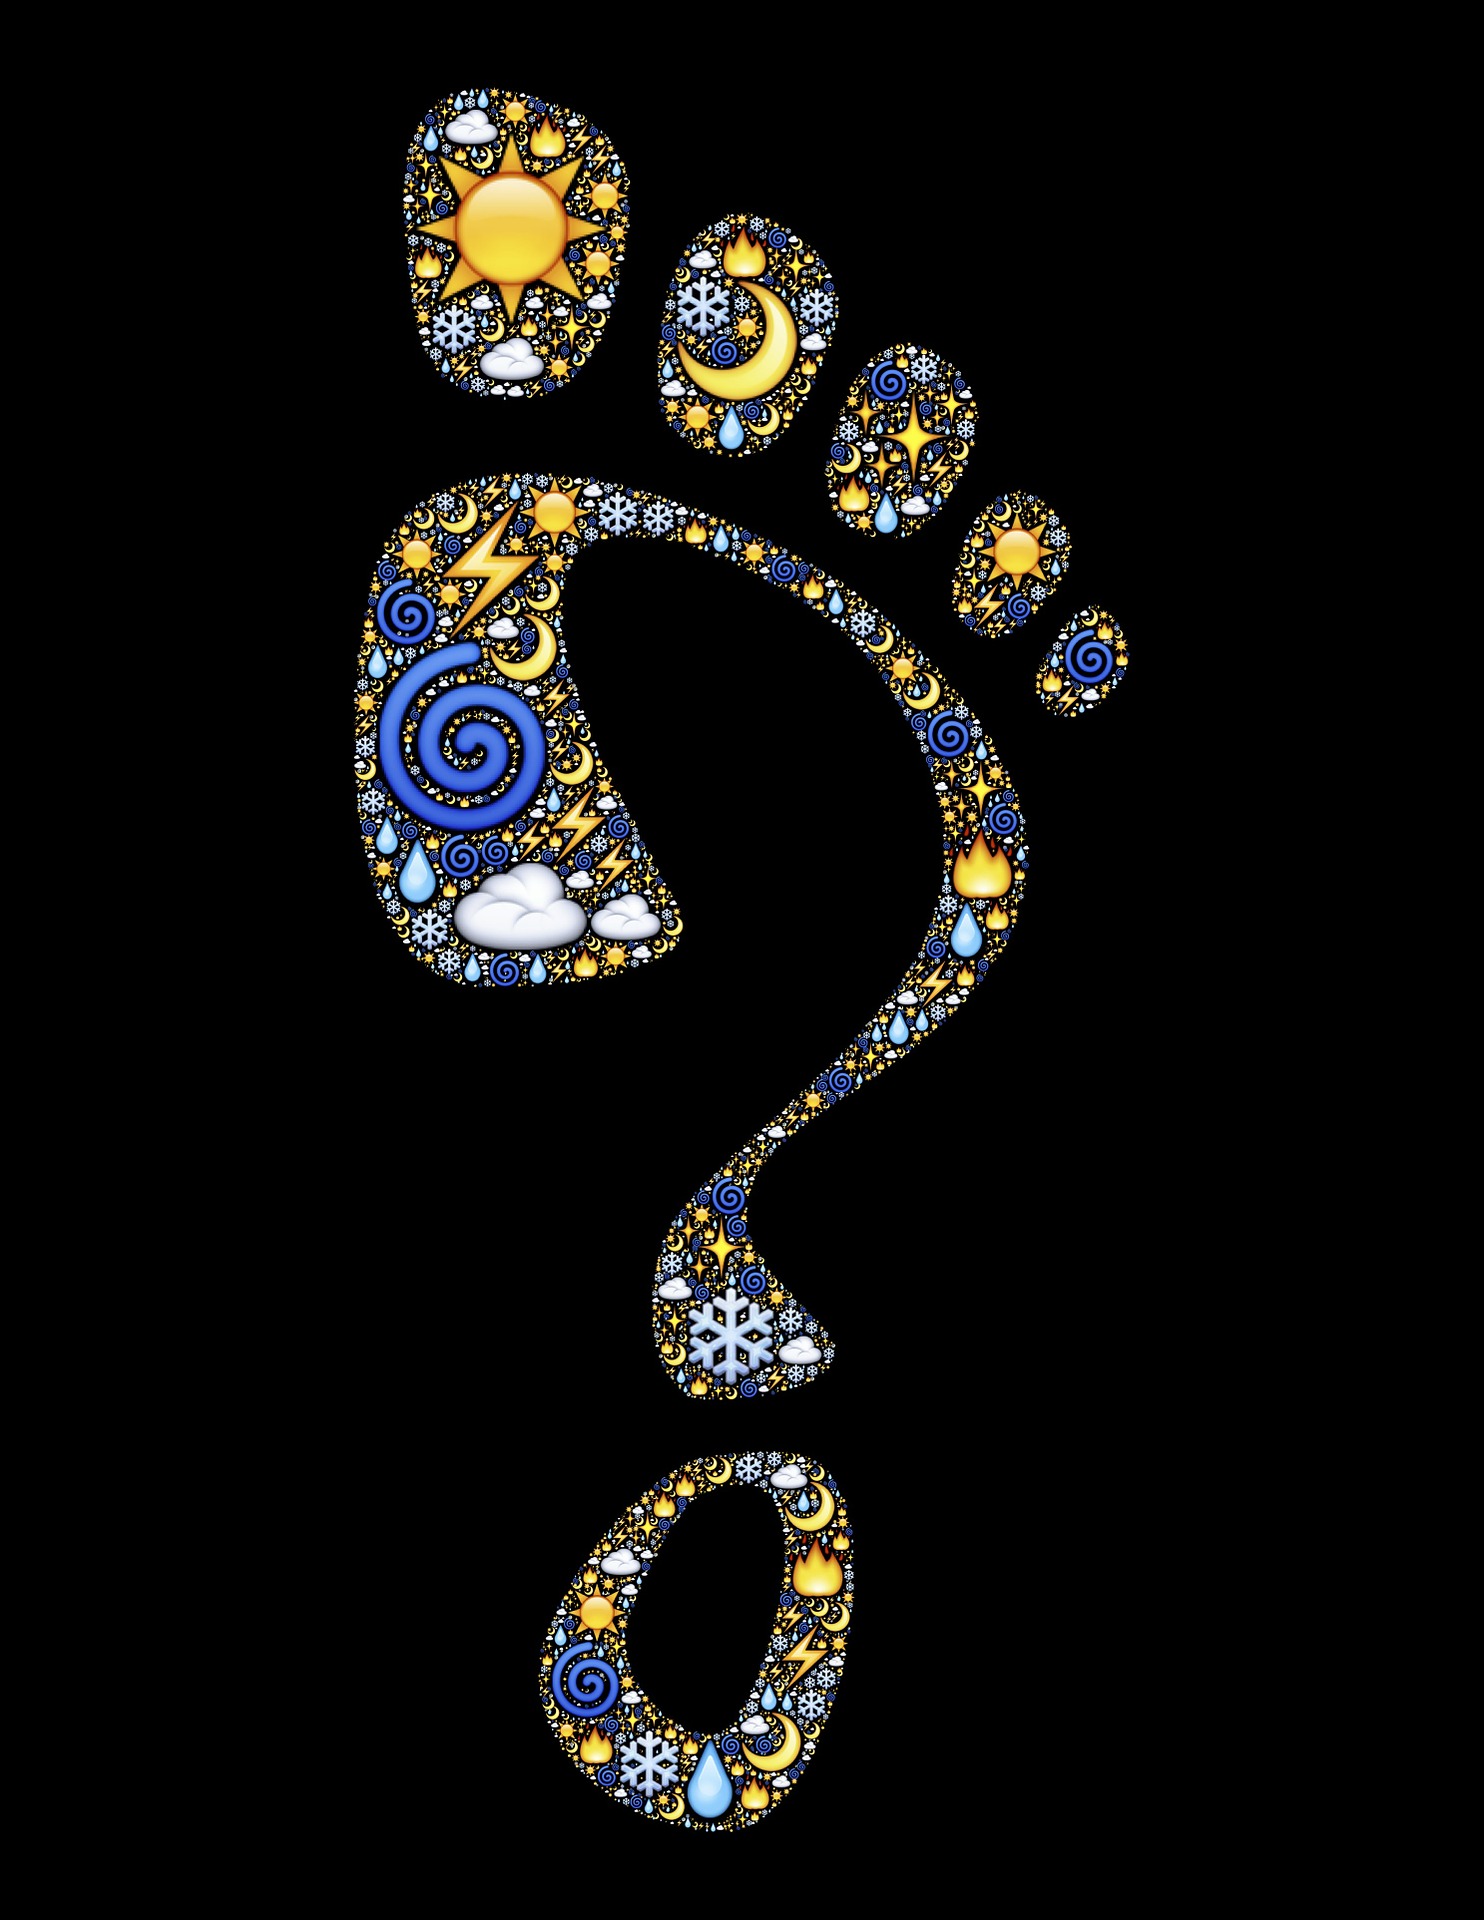 Foot in the Shape of a Question Mark by John Hain